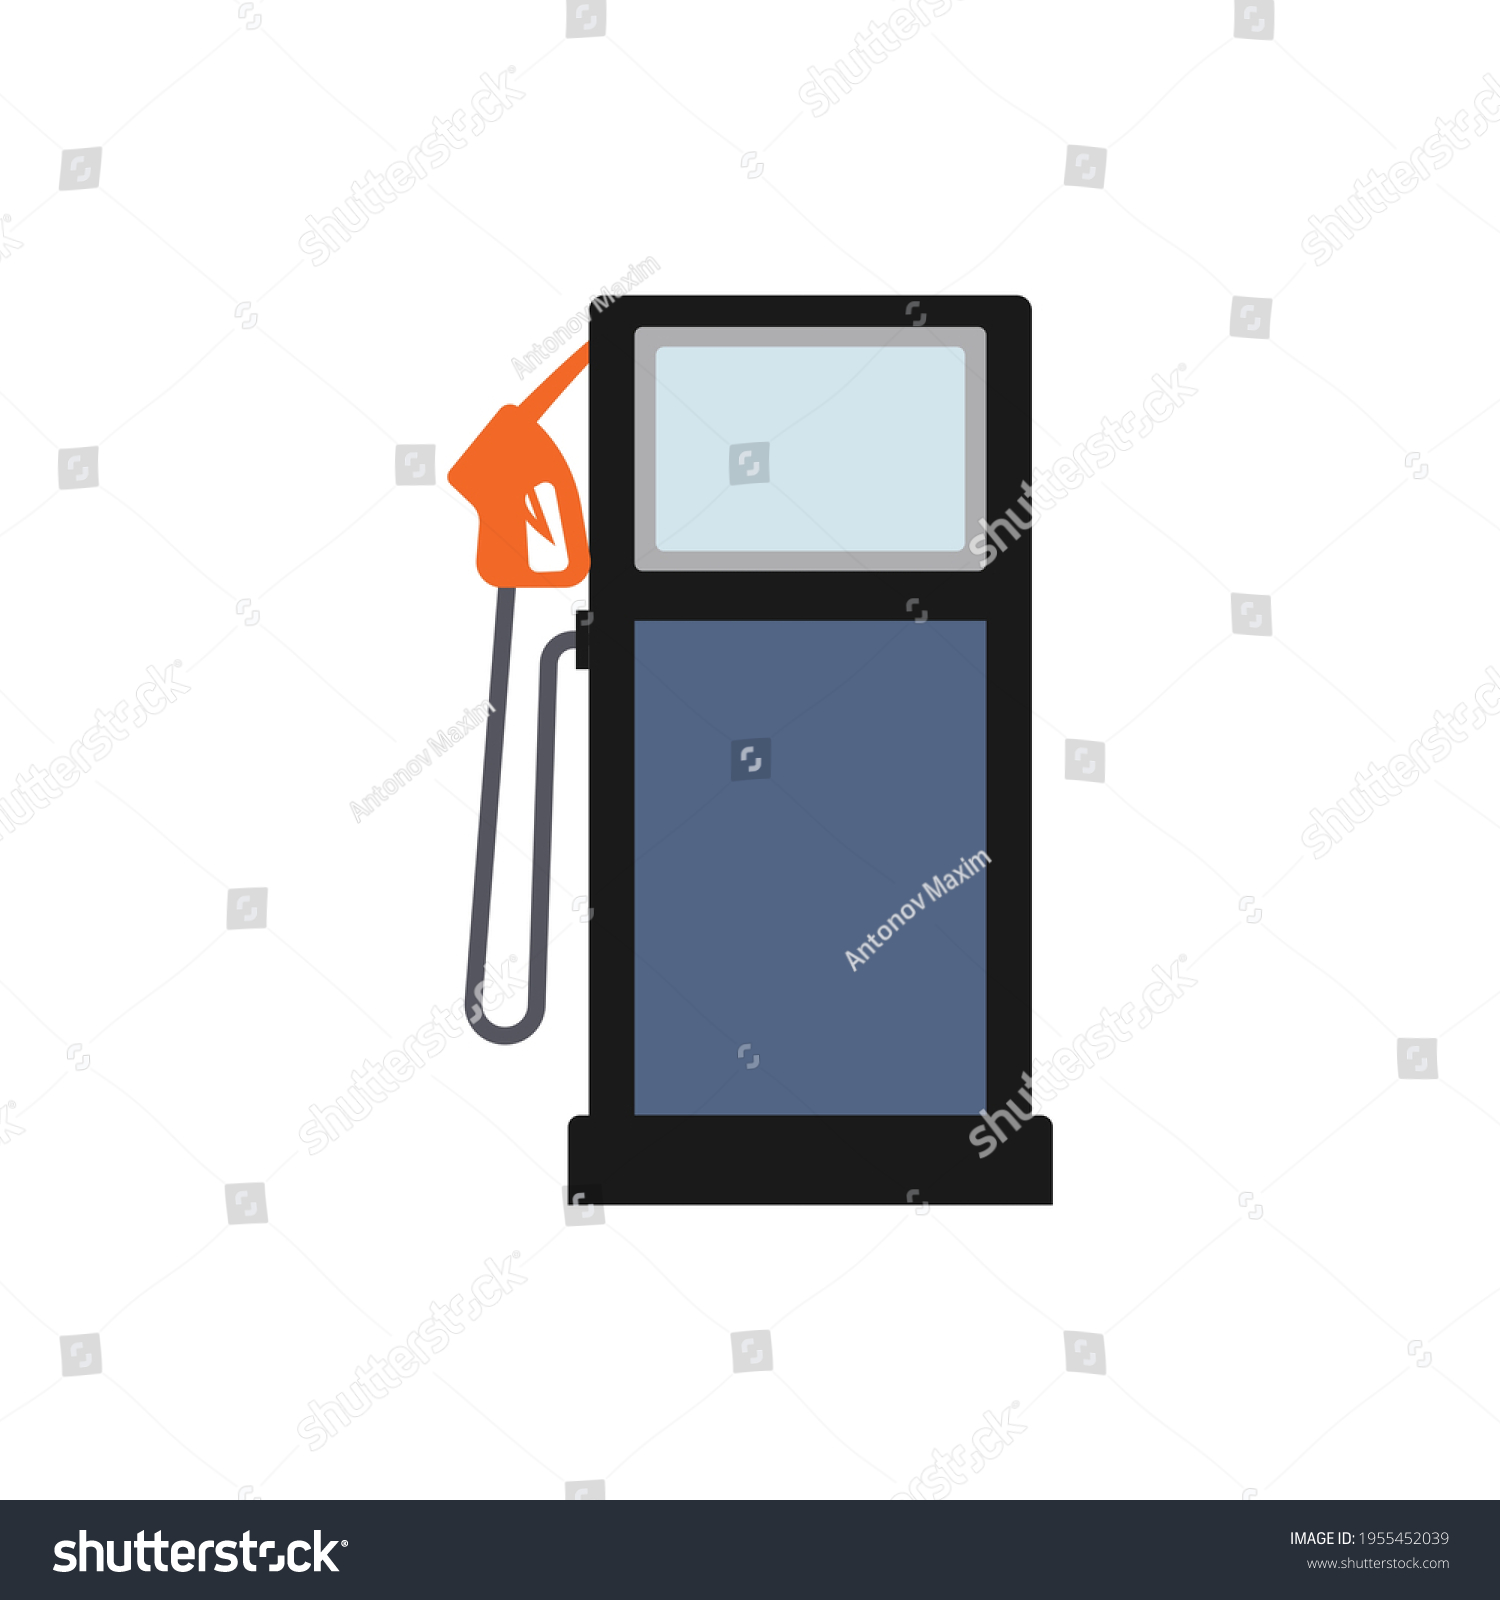 SVG of Flat gas pump or fuel dispenser from filling station, industrial pumping machine svg